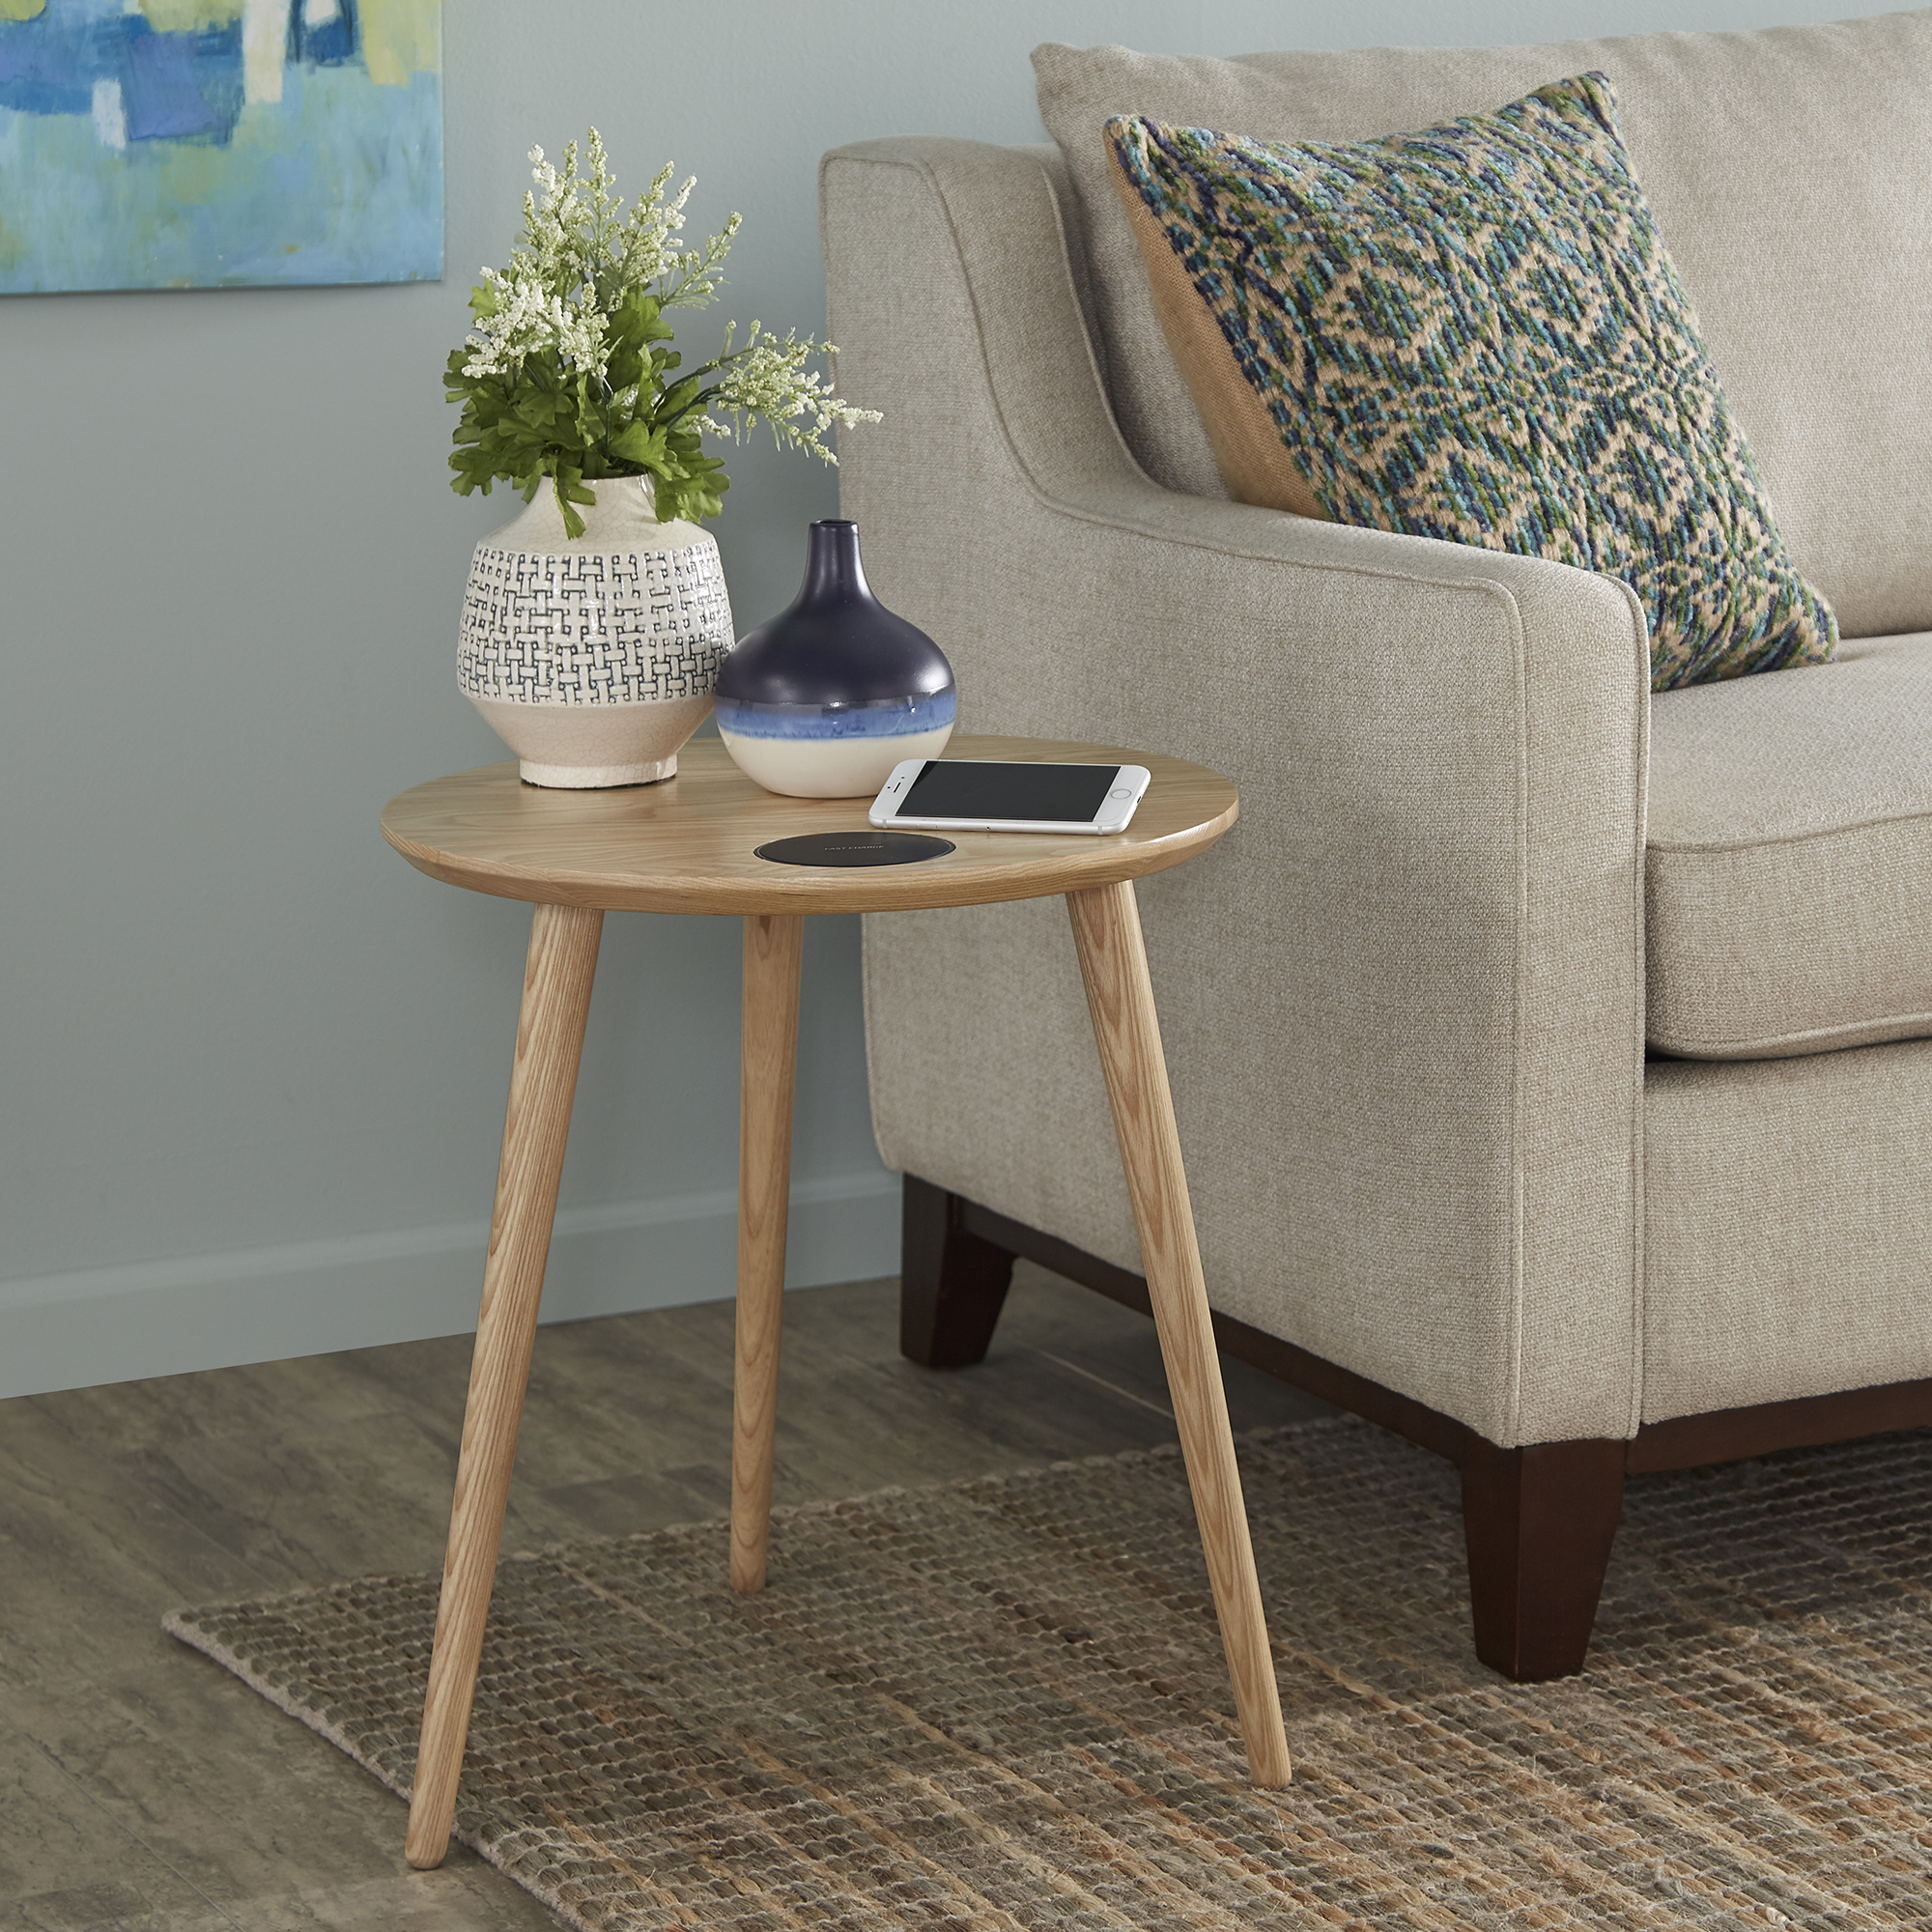 Light Oak Finish End Table With Wireless Charger